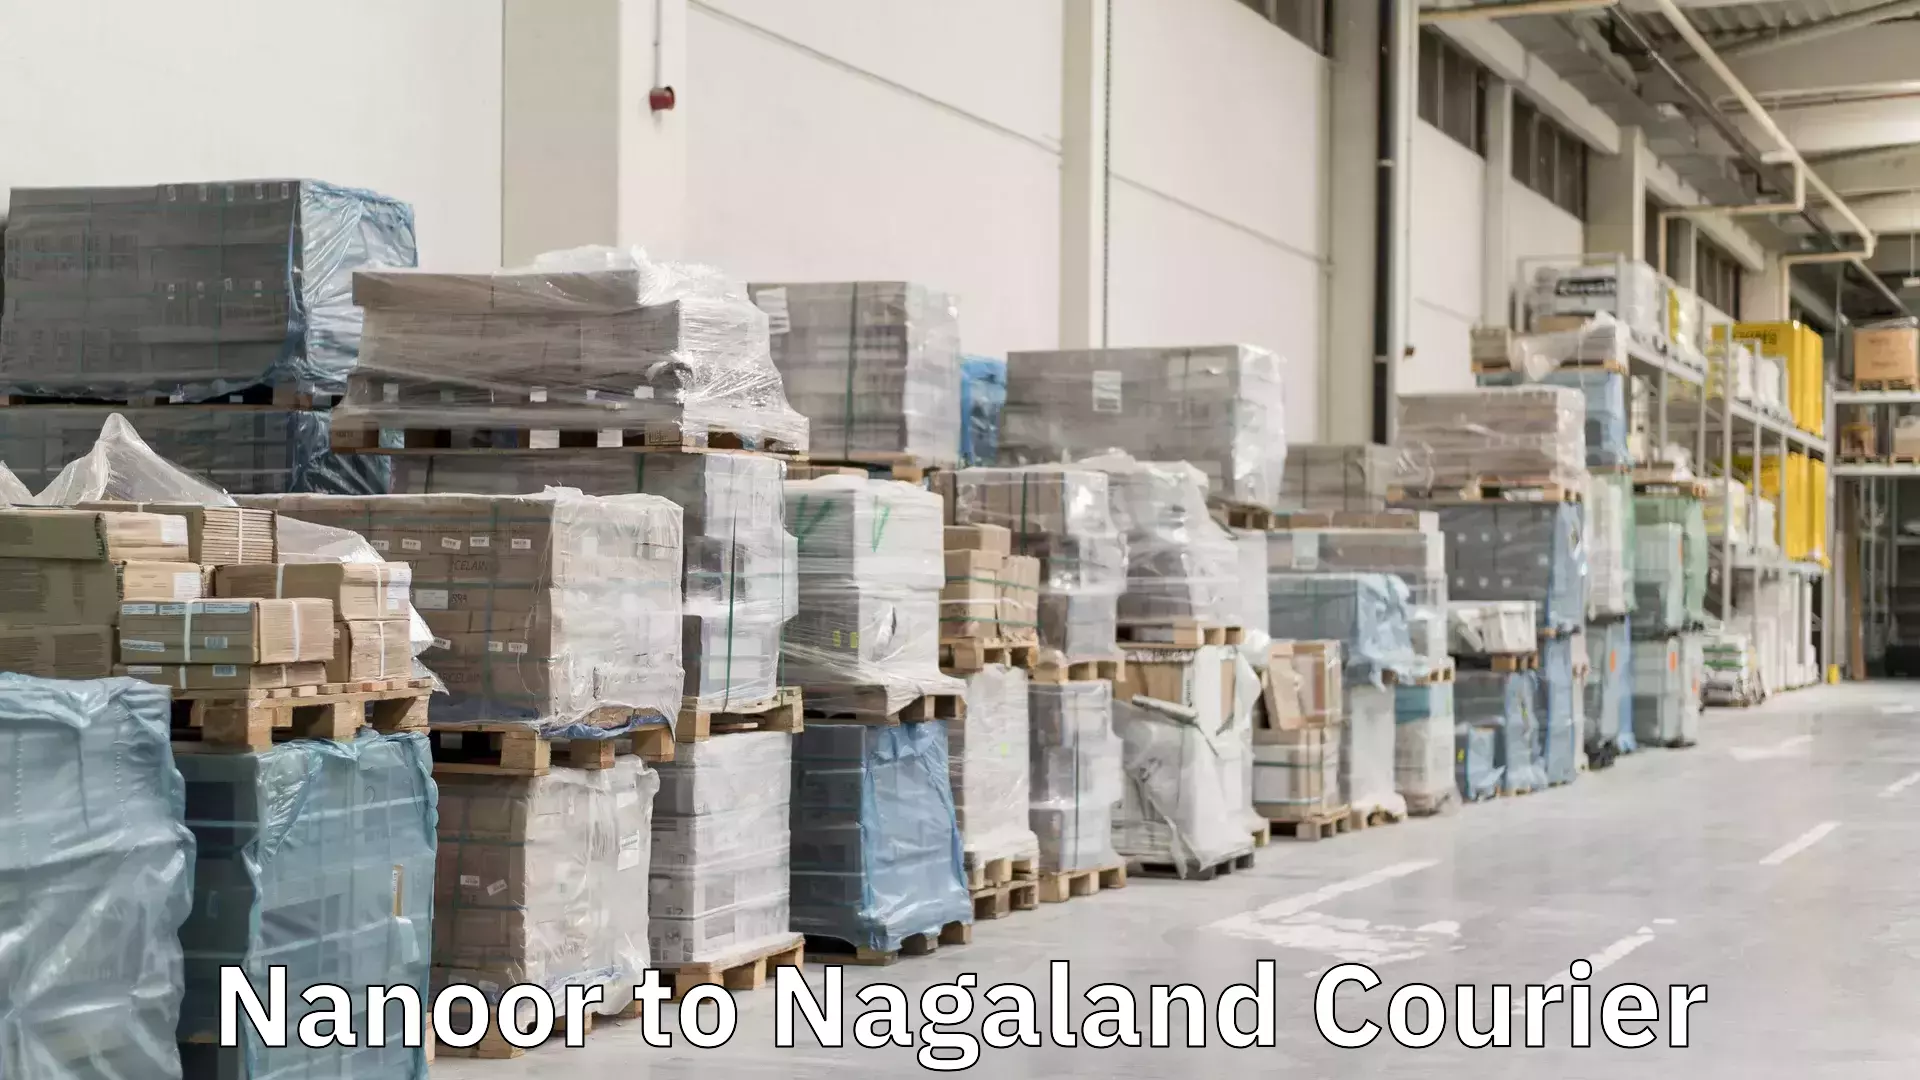 End-to-end delivery Nanoor to Nagaland